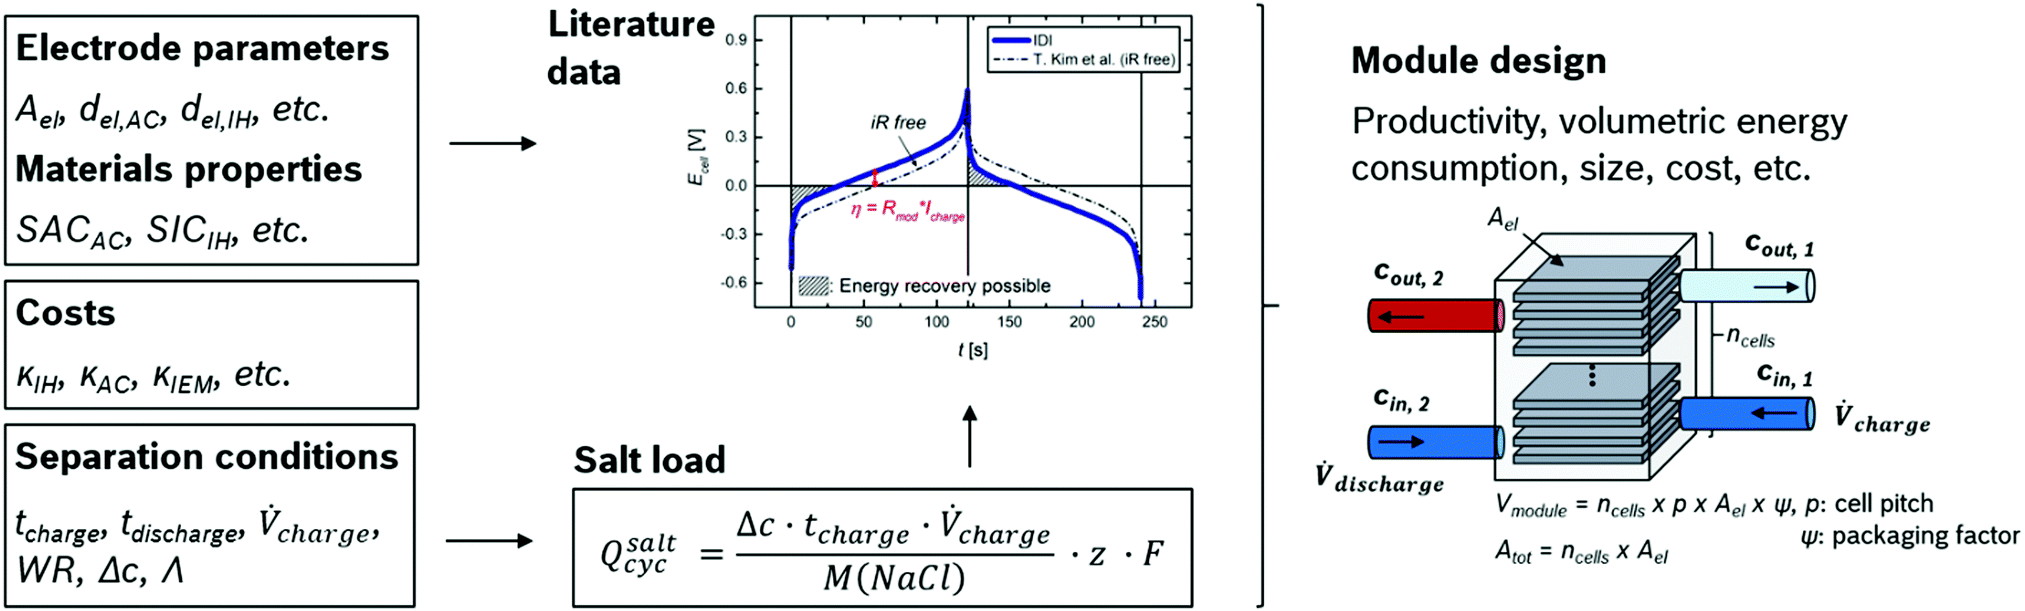 Reply To The Comment On Techno Economic Analysis Of Capacitive And Intercalative Water Deionization By S K Patel L Wang And M Elimelech Ener Energy Environmental Science Rsc Publishing Doi 10 1039 D1eeh